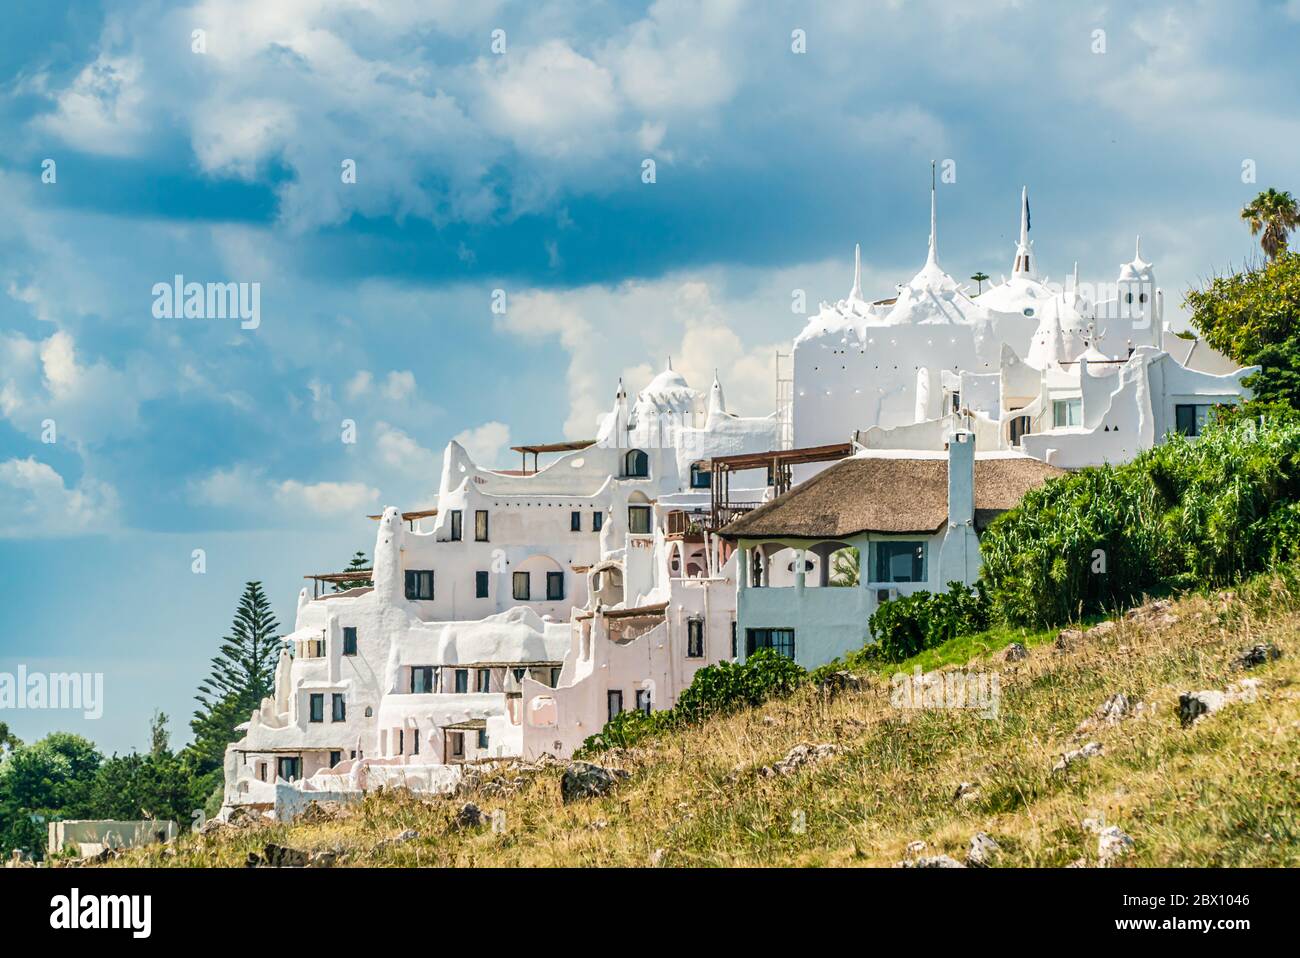 The famous Casapueblo, the Whitewashed cement and stucco buildings near the town of Punta Del Este, Uruguay, January 28th 2019 Stock Photo